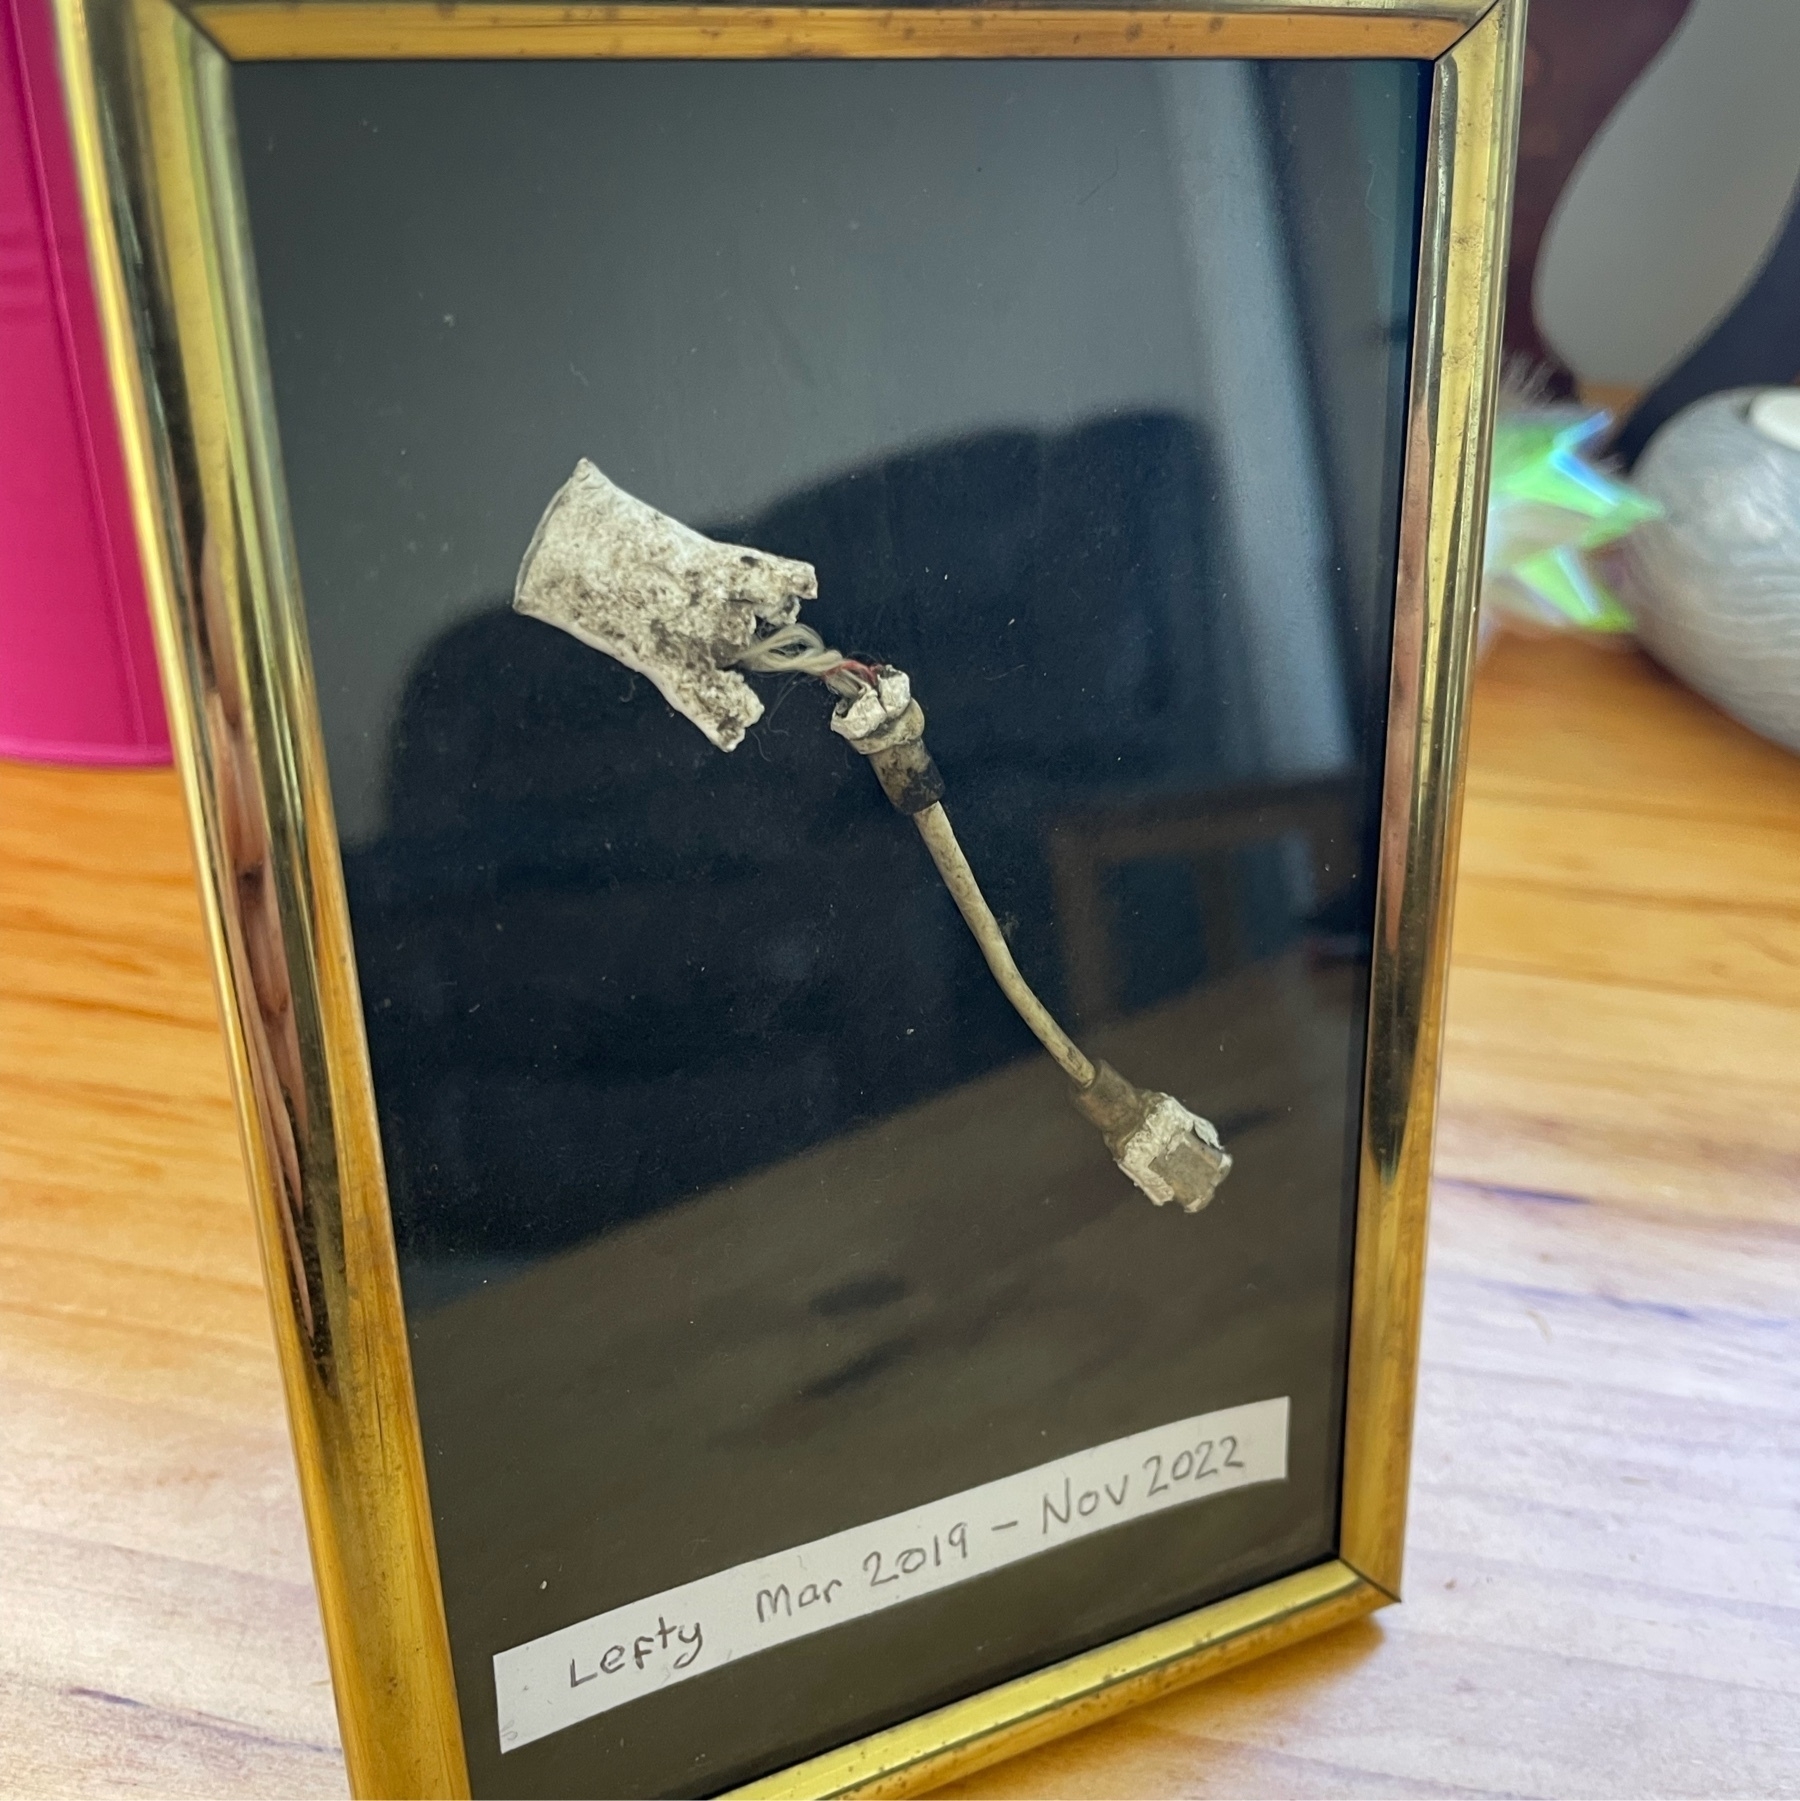 My crished Airpod Lefty. Set in a small, gold trimmed, black velvet backed picture frame. A small note at the bottom reads "Lefty Mar 2019 – Nov 2022"